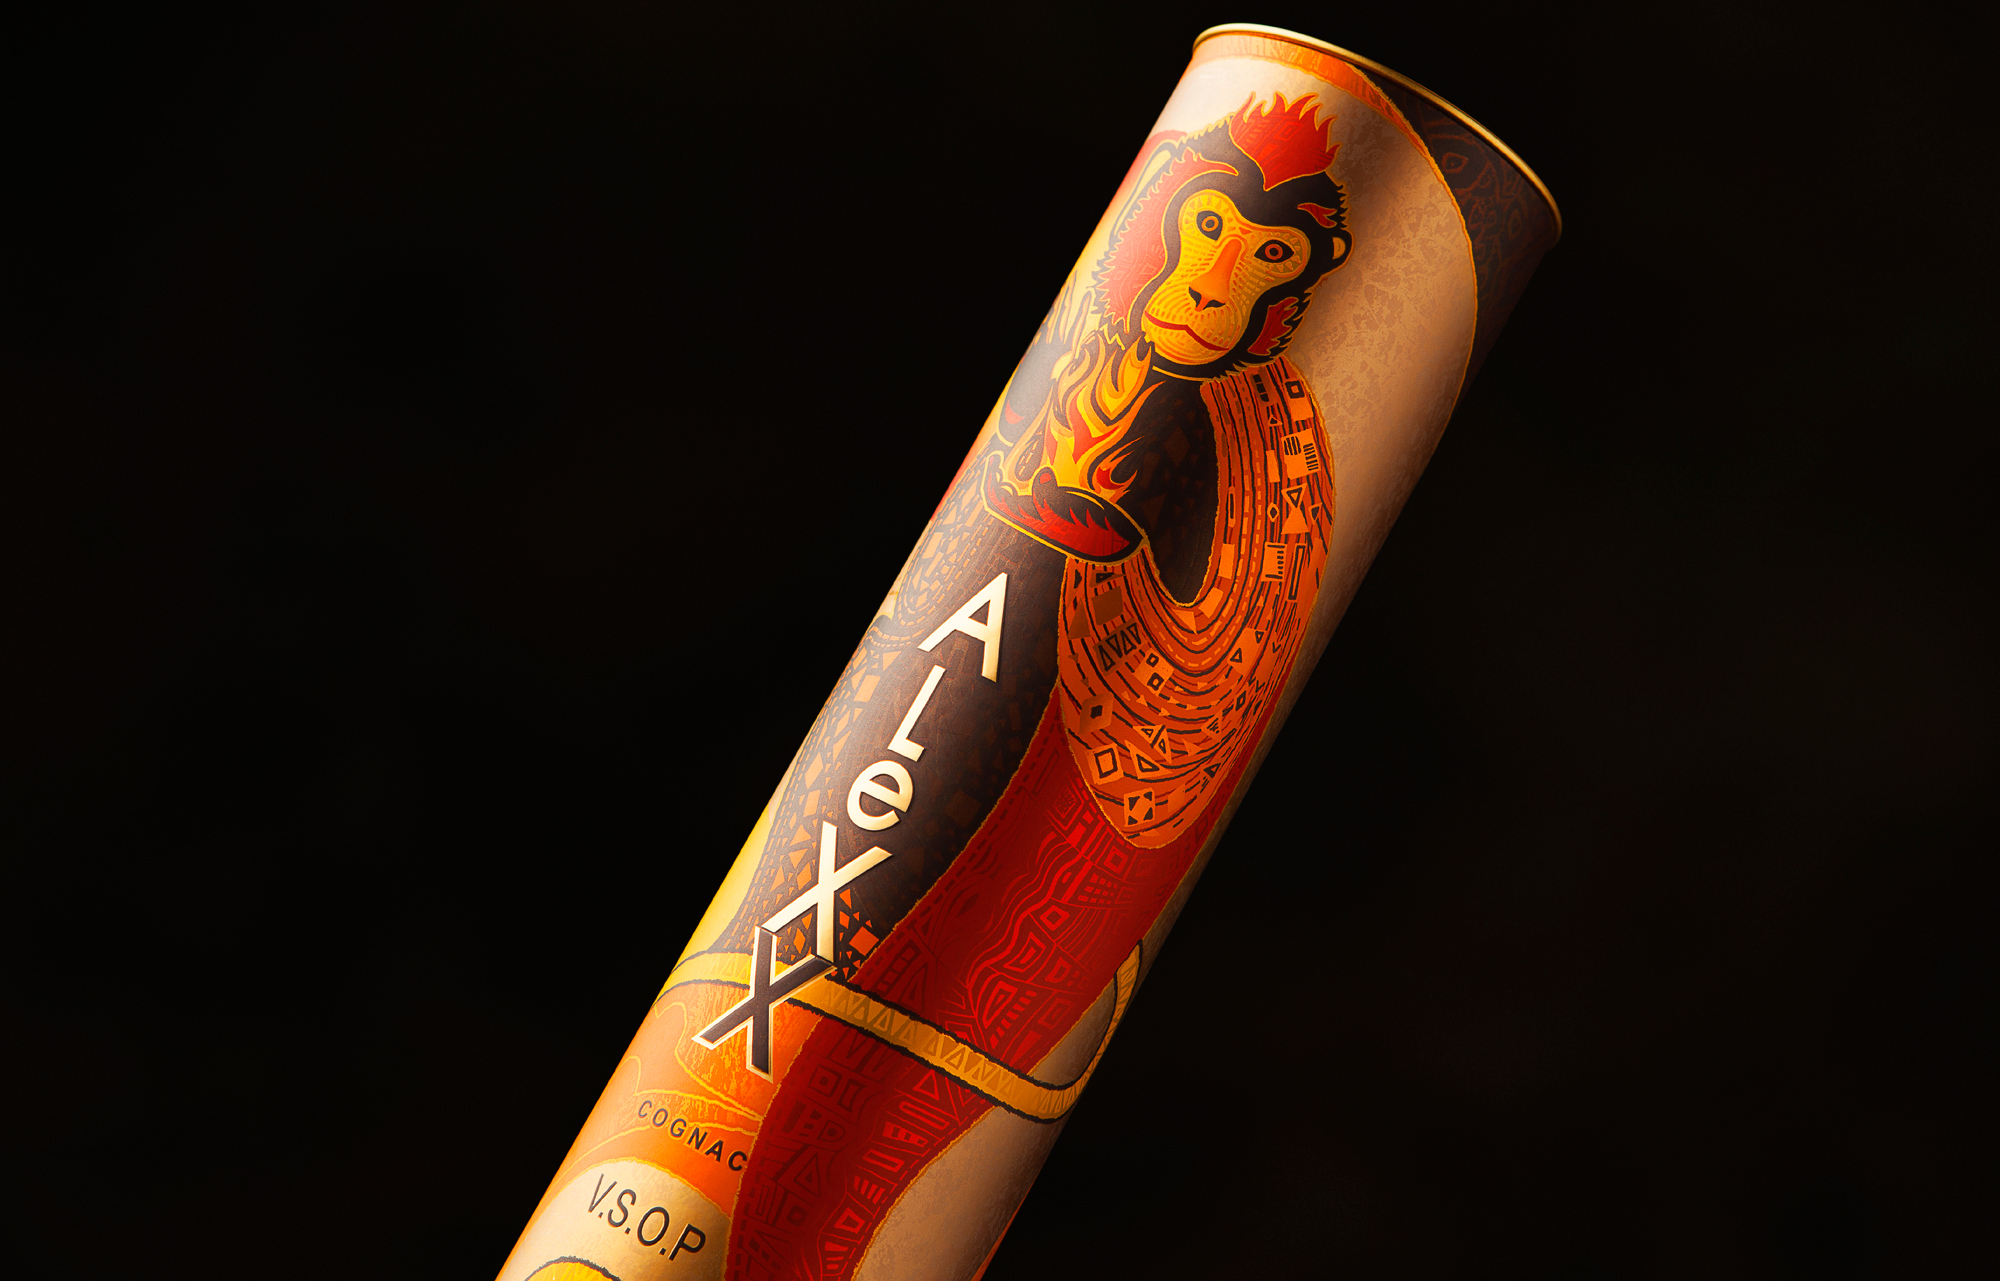 Krylia FMCG Branding Designs New Year “Red Fire Monkey” Limited Edition Packaging Design for AleXX Cognac